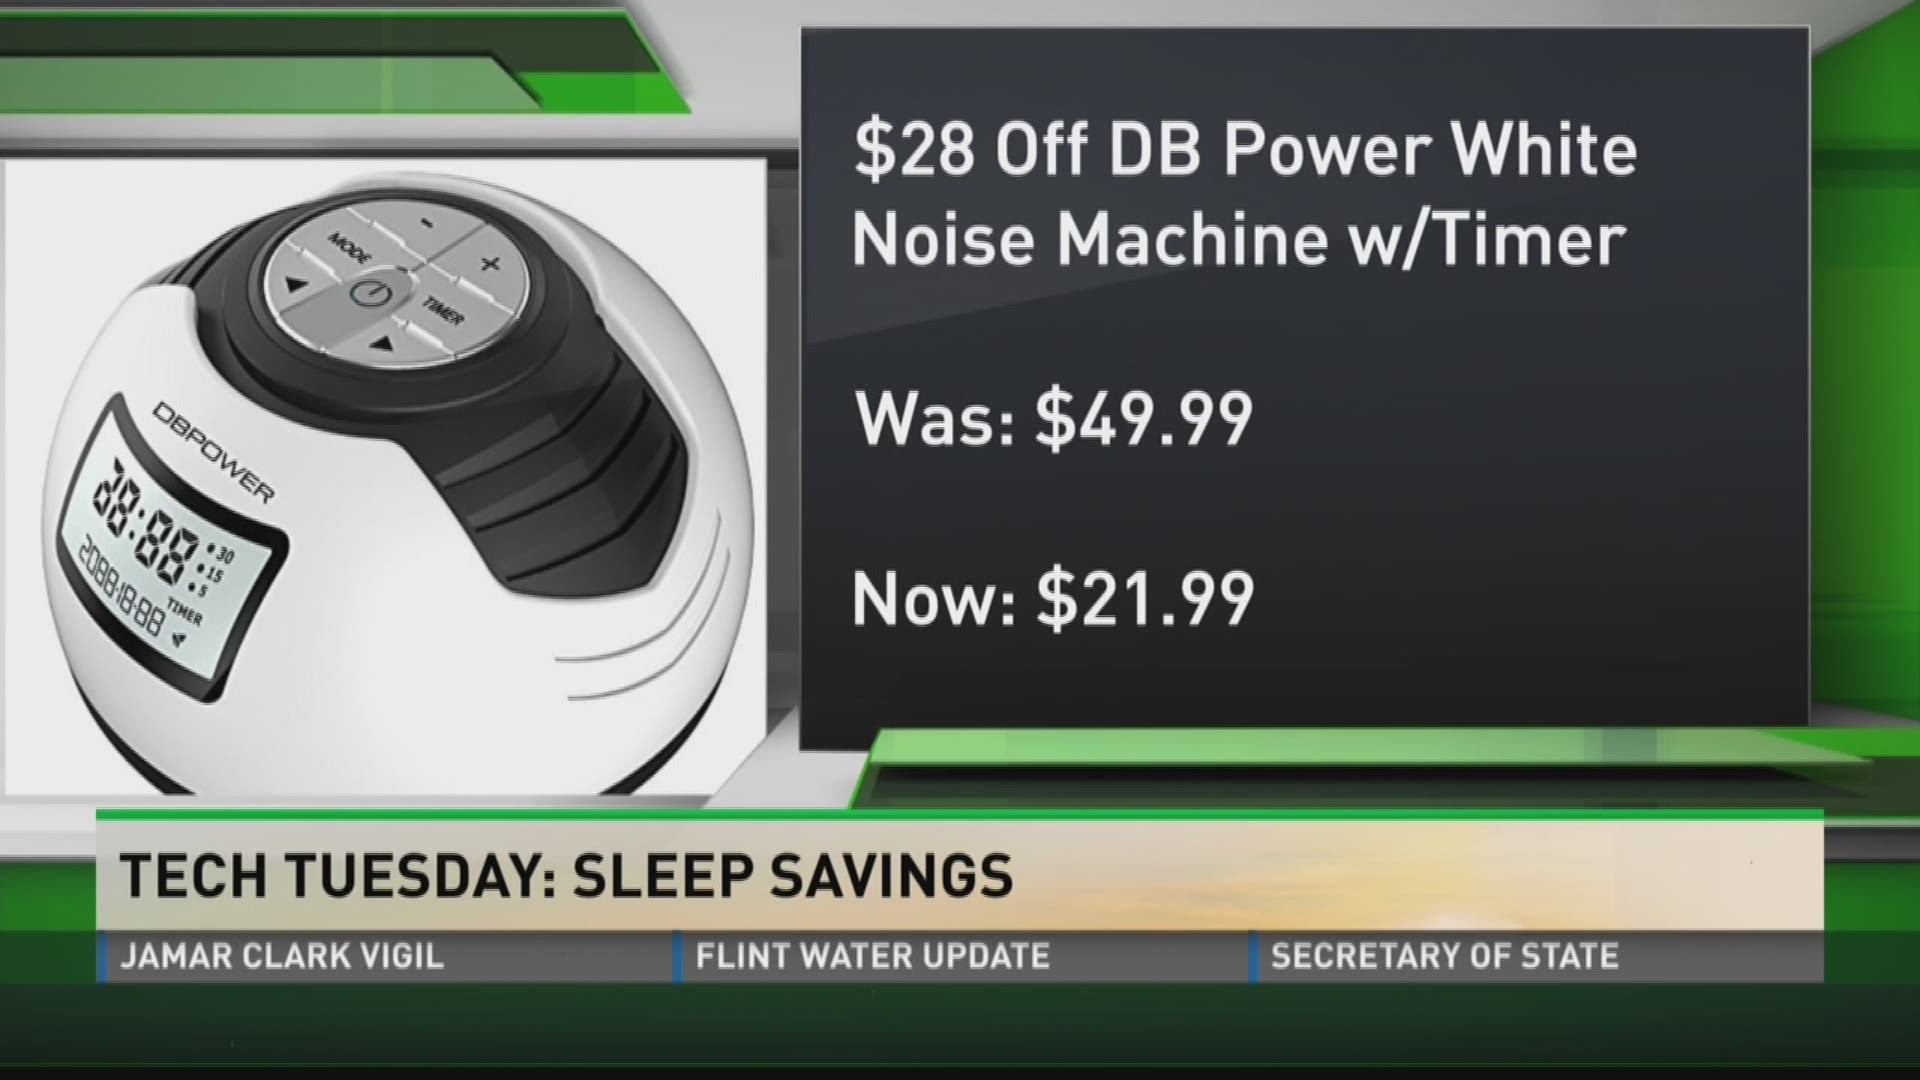 Money man Matt Granite shows how to save on a gadget that helps people sleep.